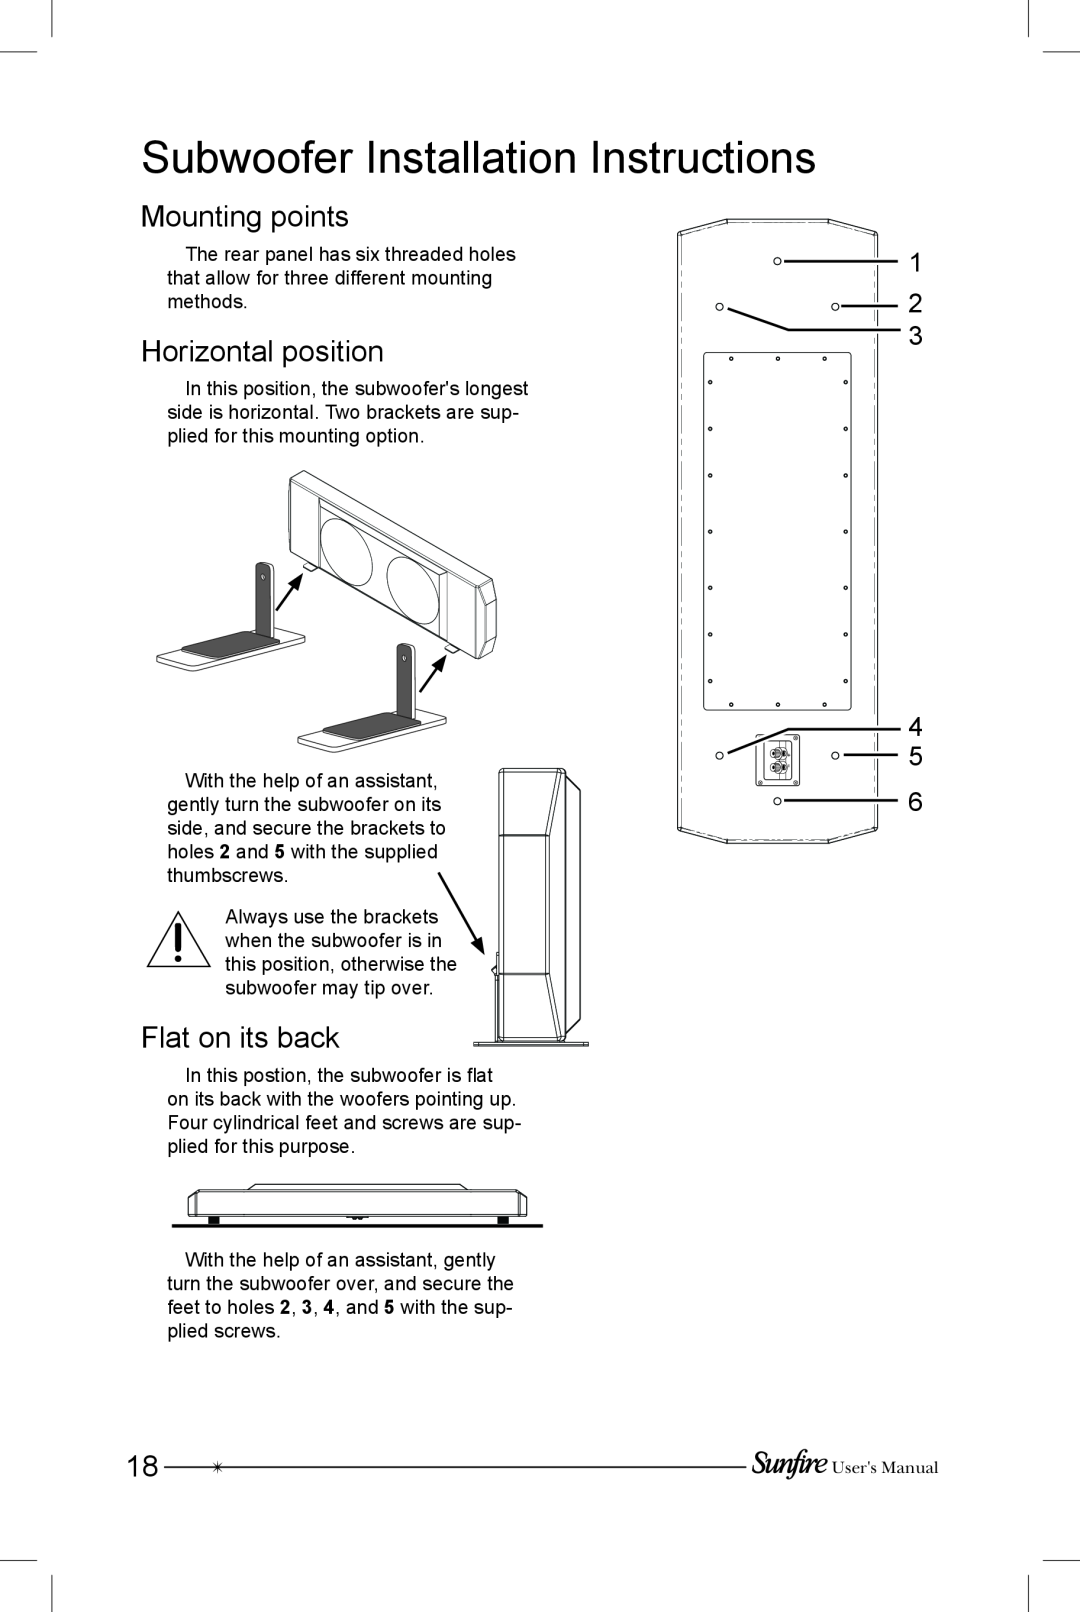 Sunfire SRS-210R Subwoofer Installation Instructions, Mounting points, Horizontal position, Flat on its back, 1 2 3 4 5 6 